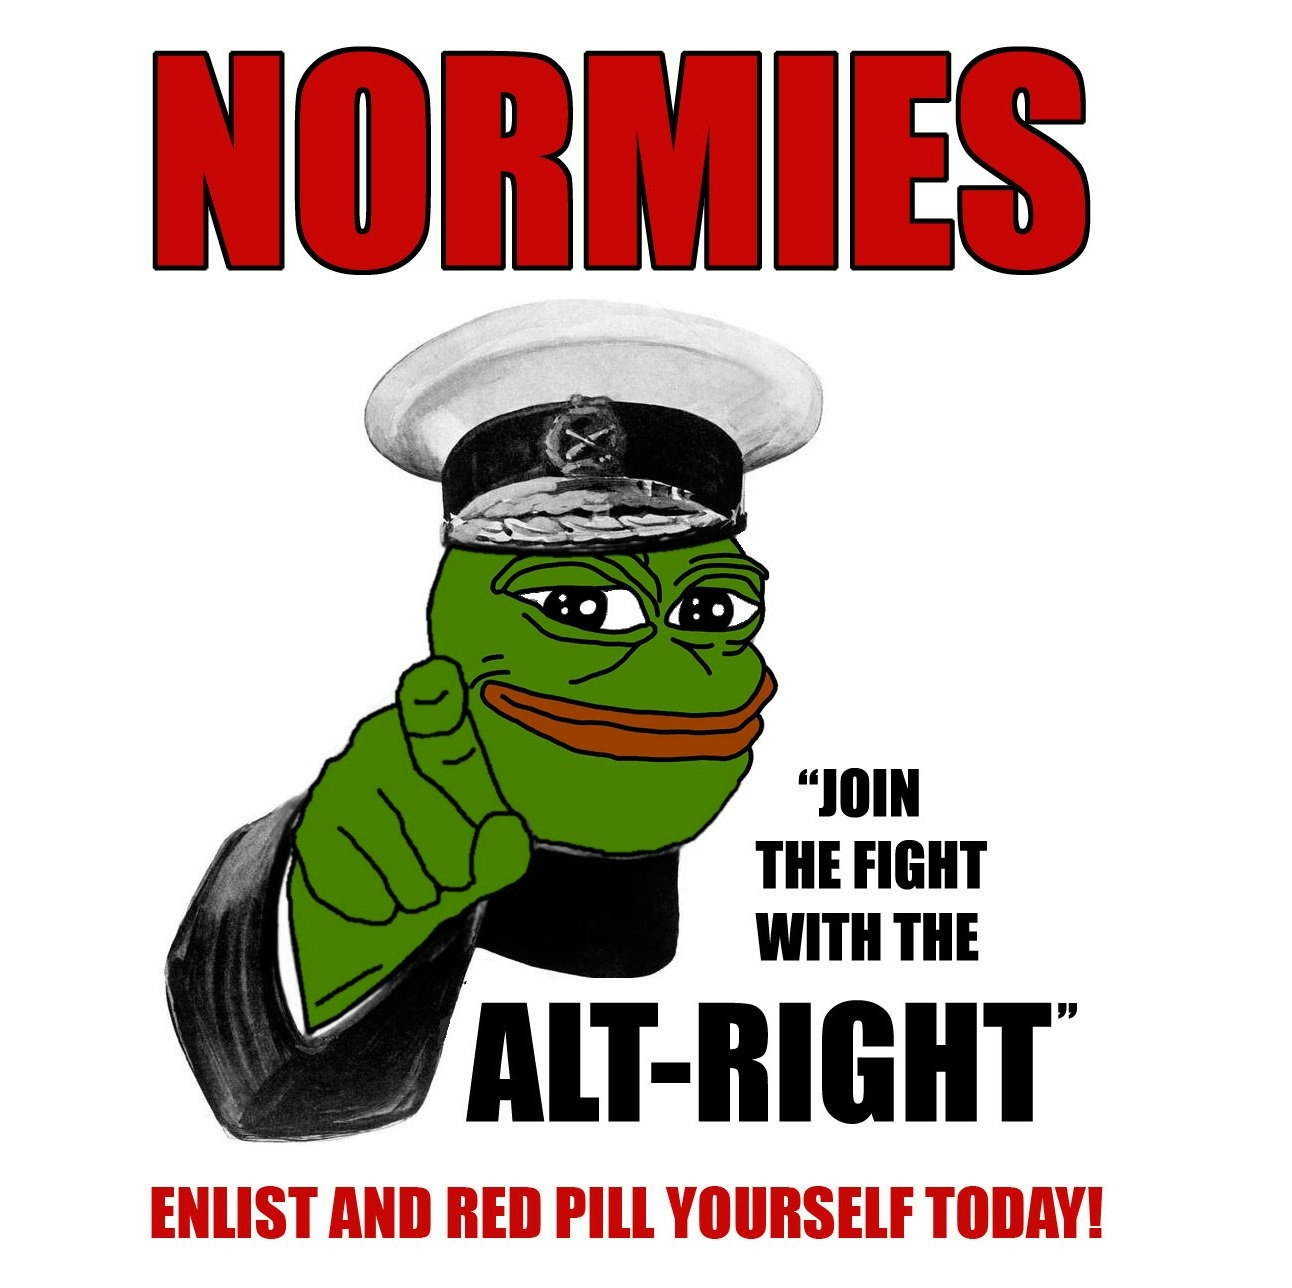 Pepe the Frog poses as an enlisting sergeant for the Alt-Right